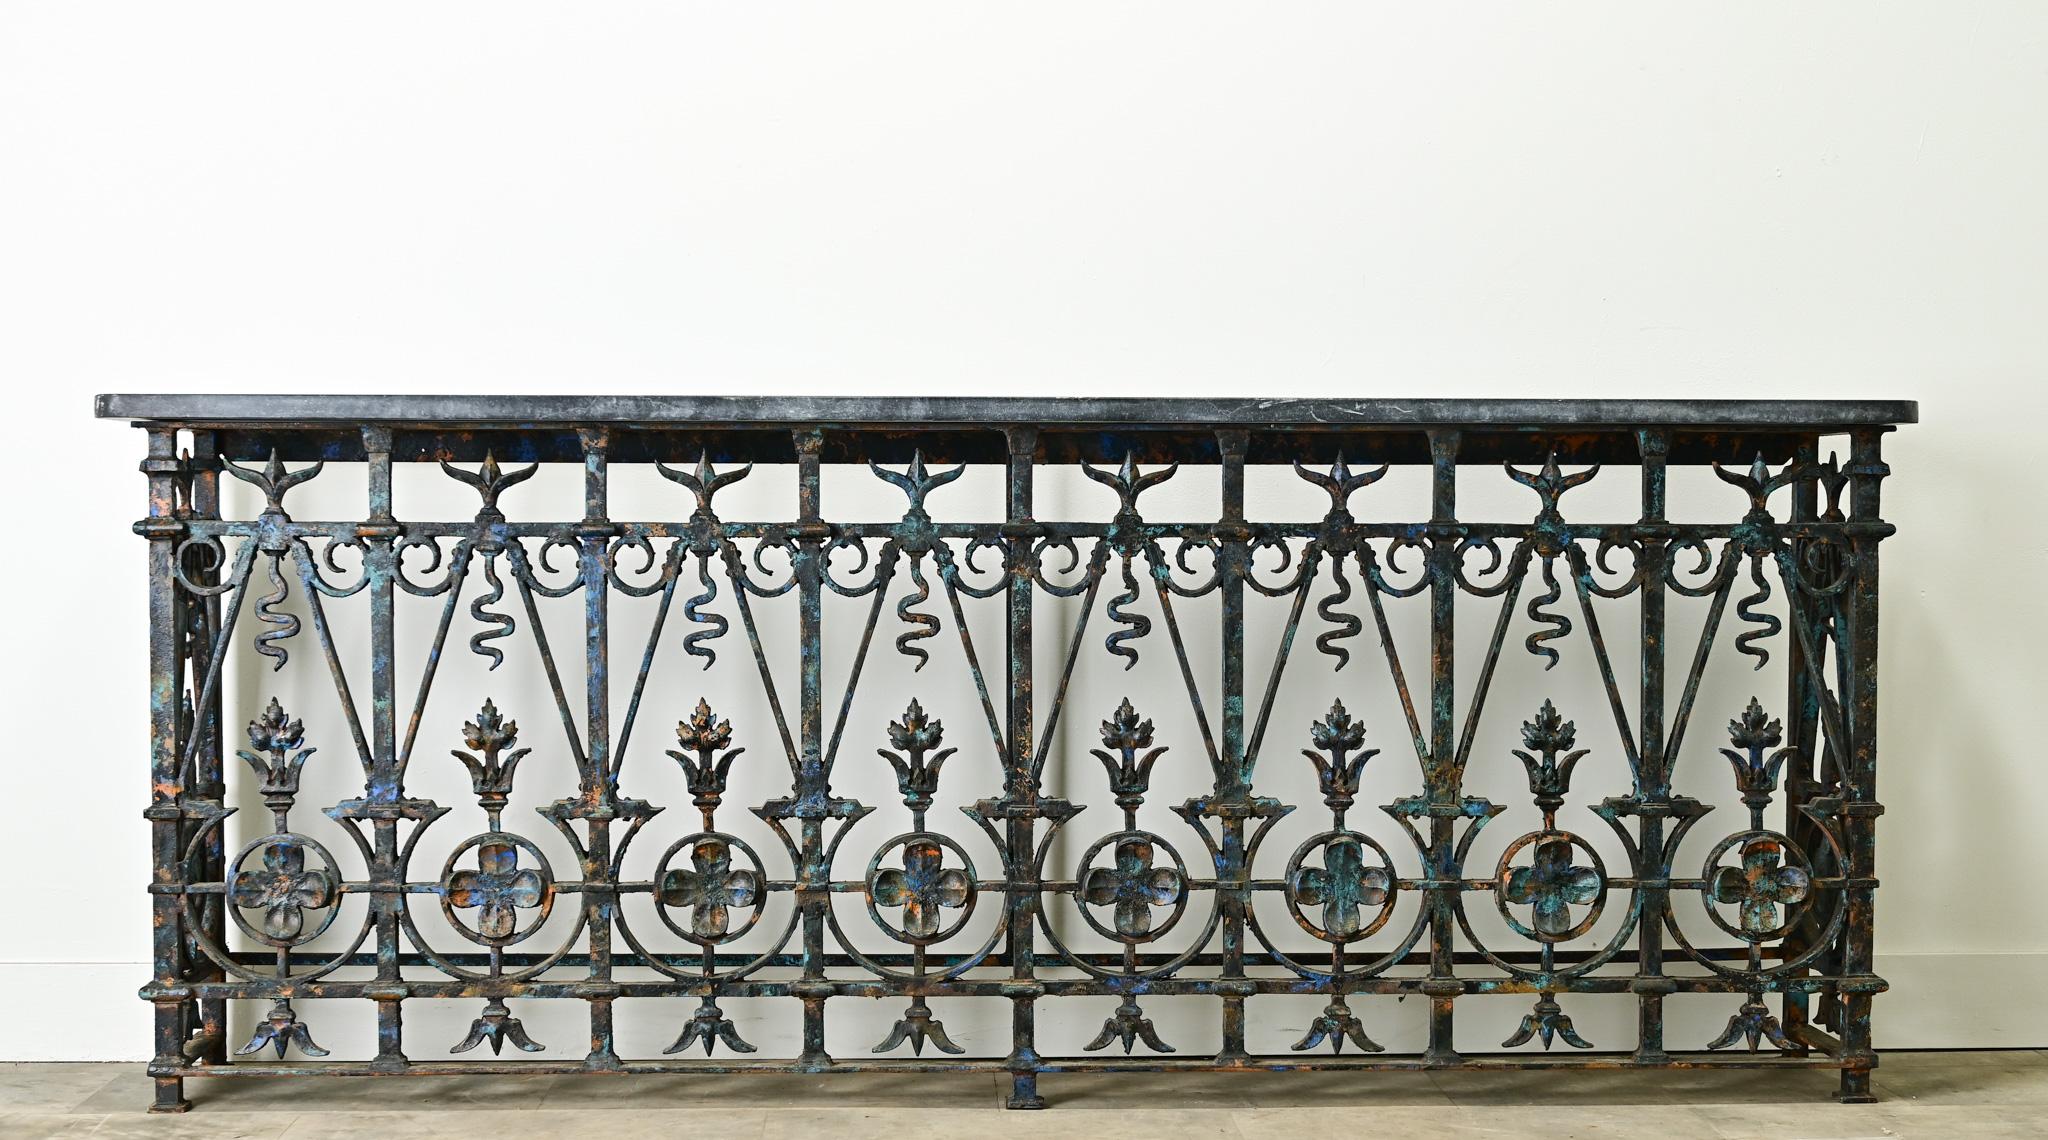 French balconies have always been admired for their iron craftsmanship and are often repurposed as furniture.  This impressive wrought iron balcony has playful patterns and designs with a worn painted finish and makes the perfect base. A new Belgium